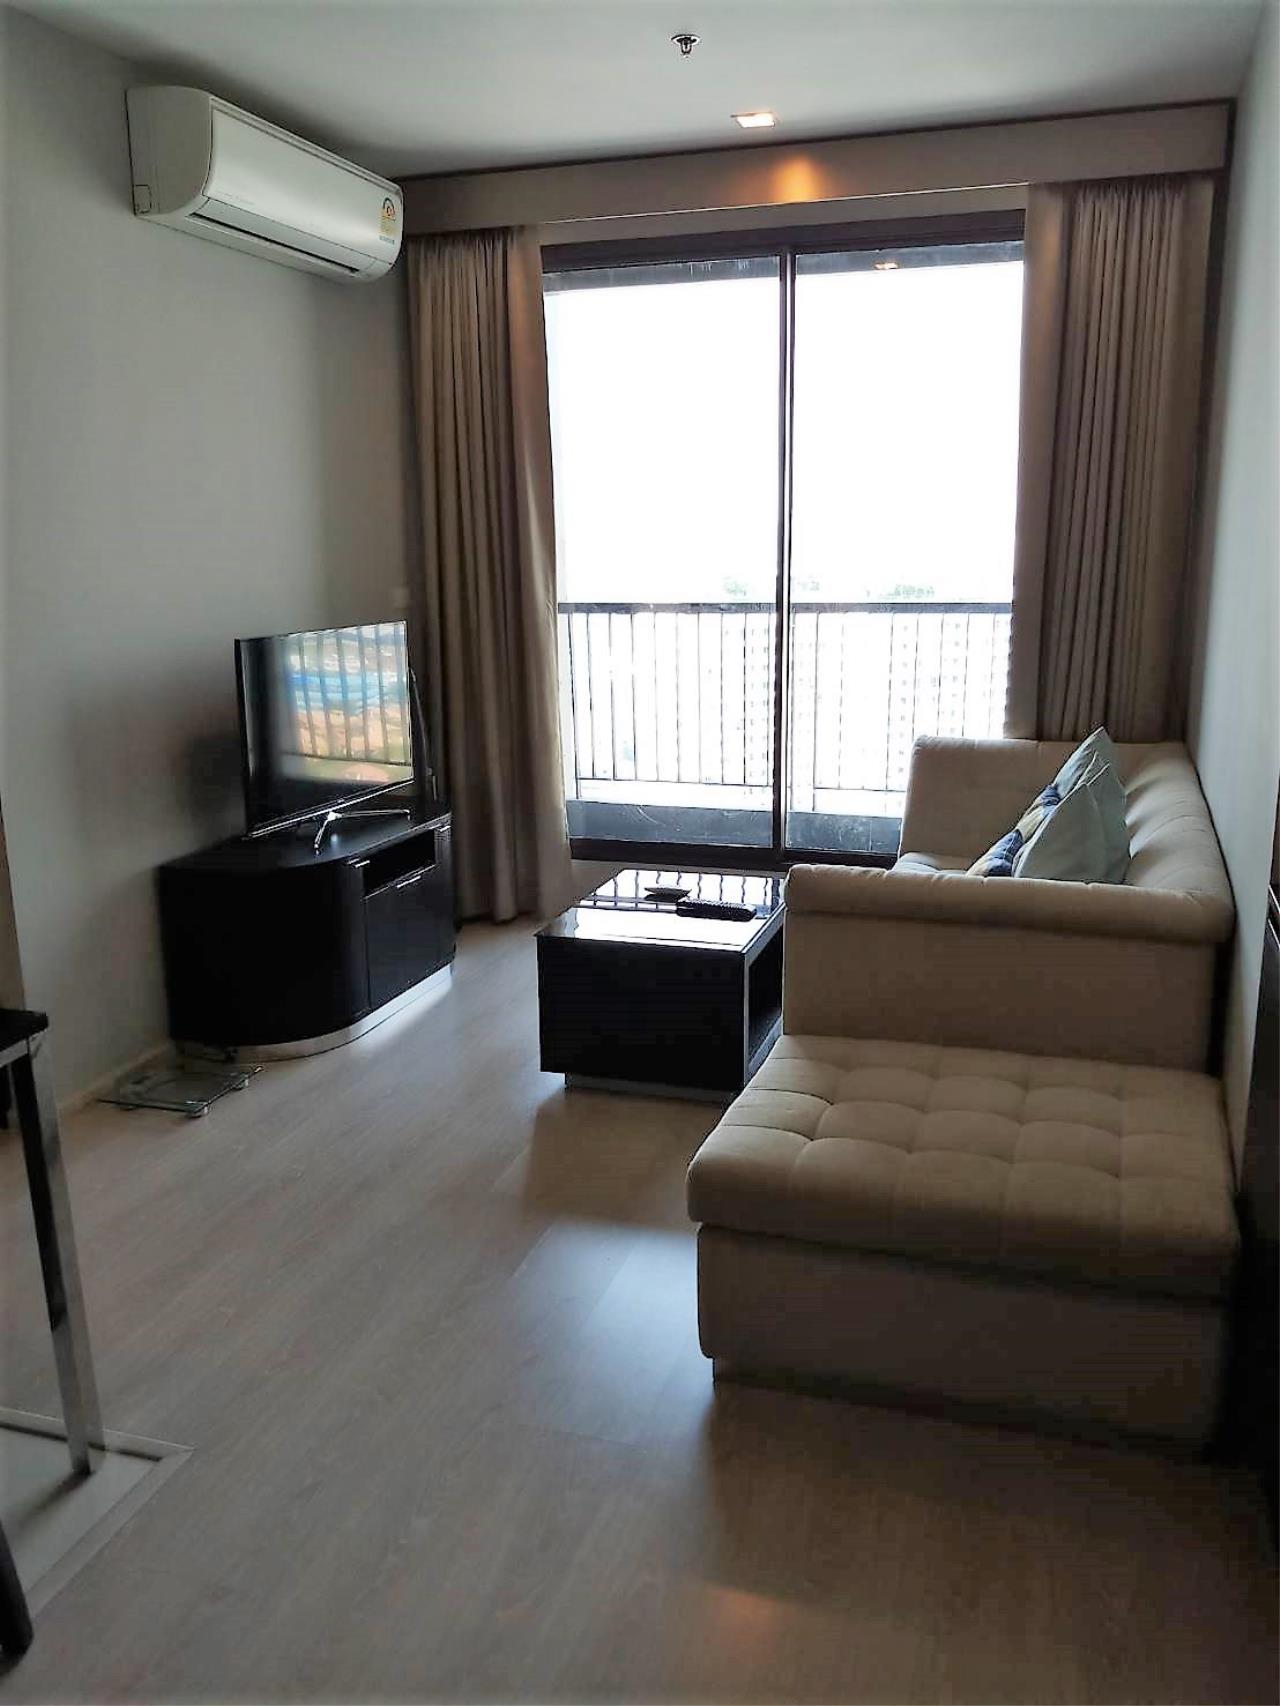 RE/MAX All Star Realty Agency's Rhythm 44 for rent (BTS Phra kanong) 1